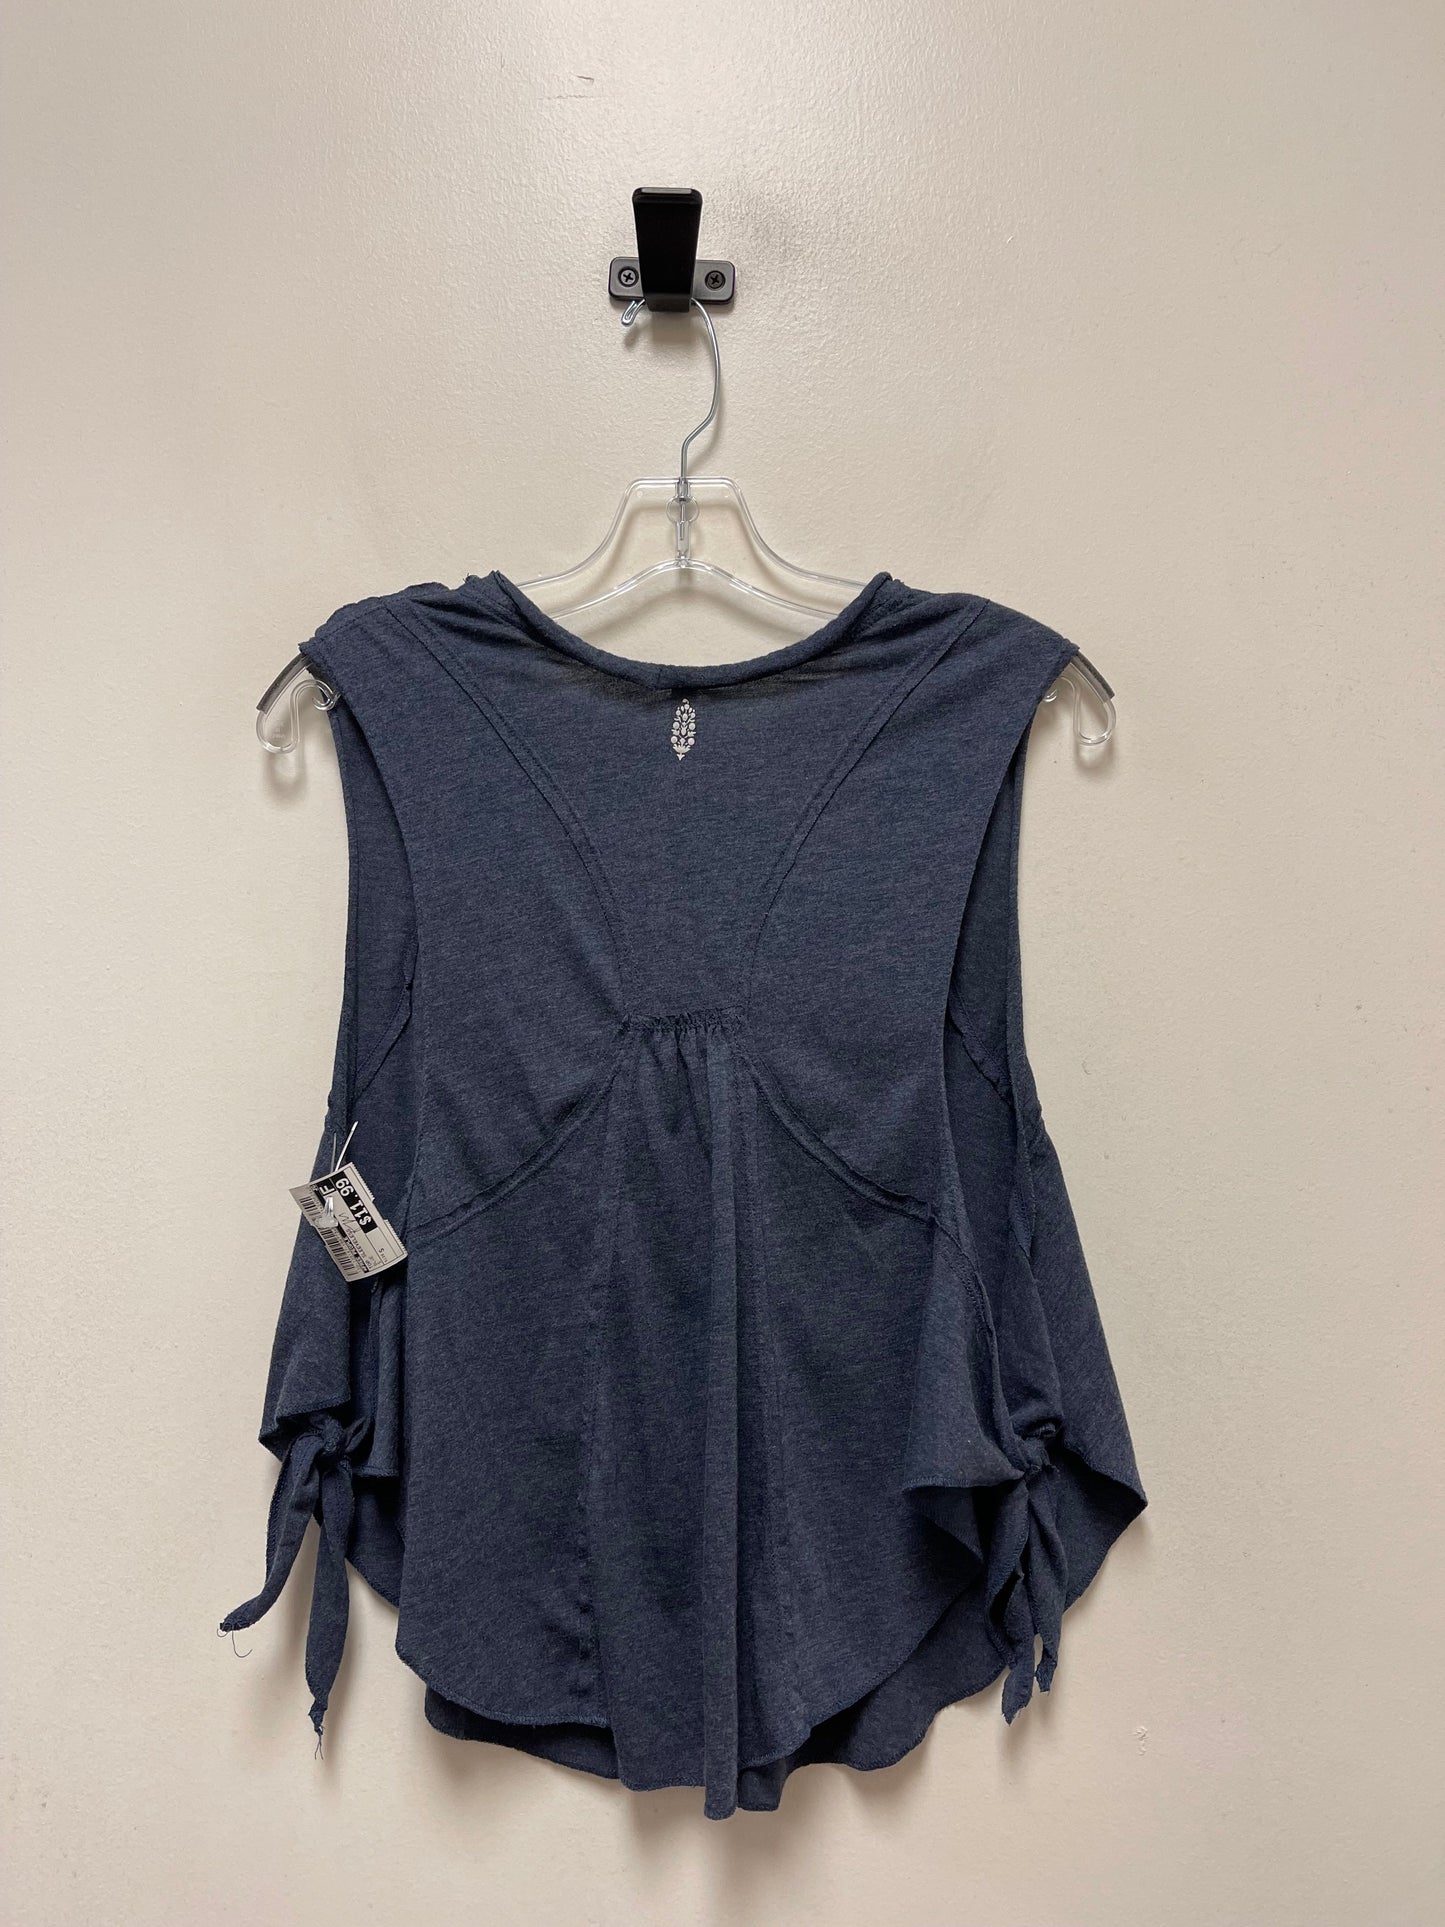 Blue Top Sleeveless Free People, Size S